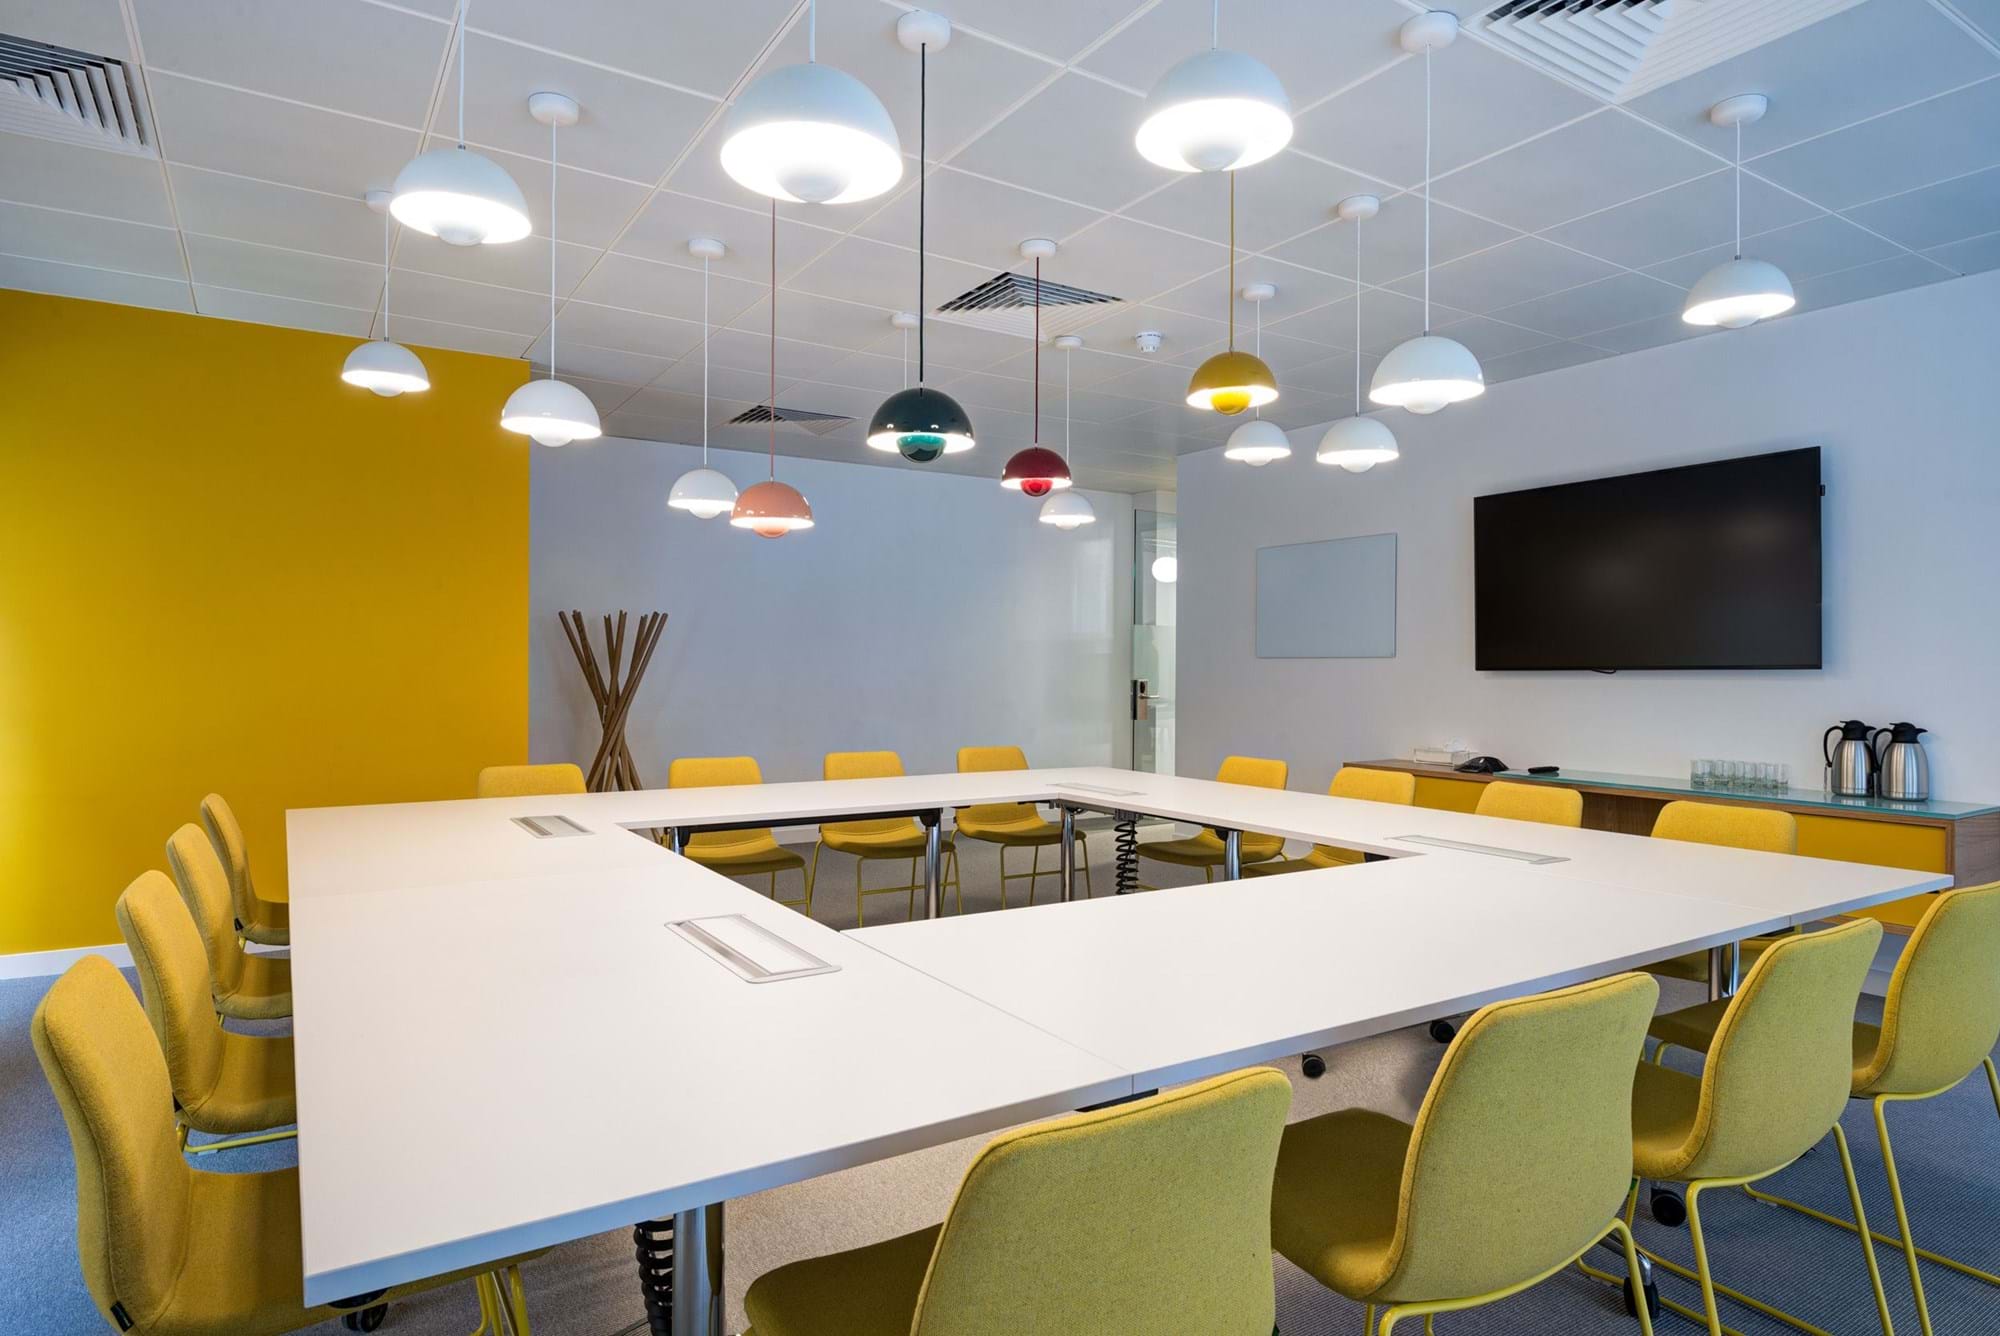 Modus Workspace office design, fit out and refurbishment - Spaces - Brighton - Spaces Brighton 10 highres sRGB.jpg